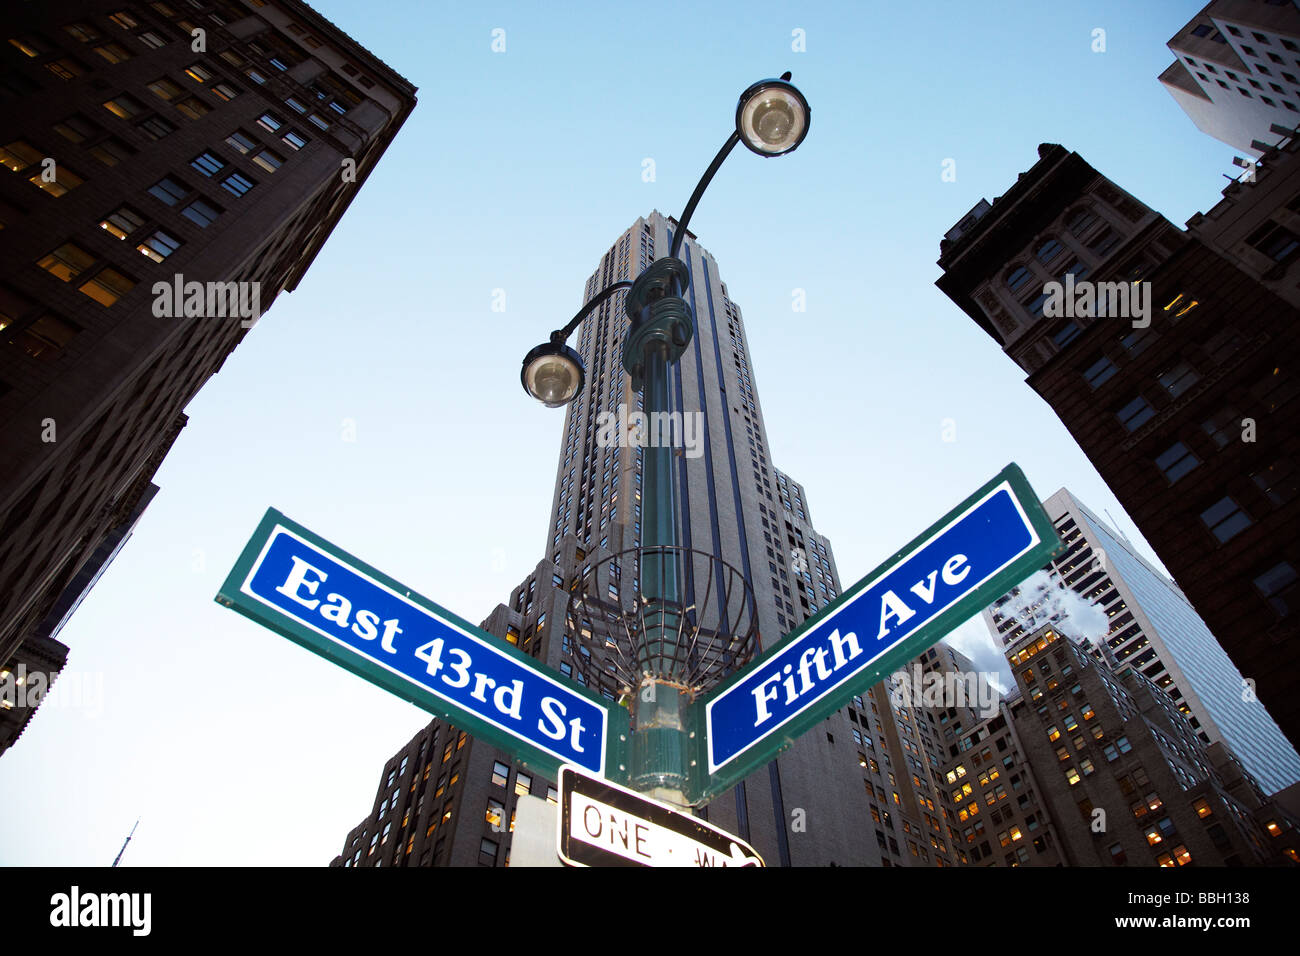 East 43rd St & Fifth Ave Intersection, New York Stock Photo